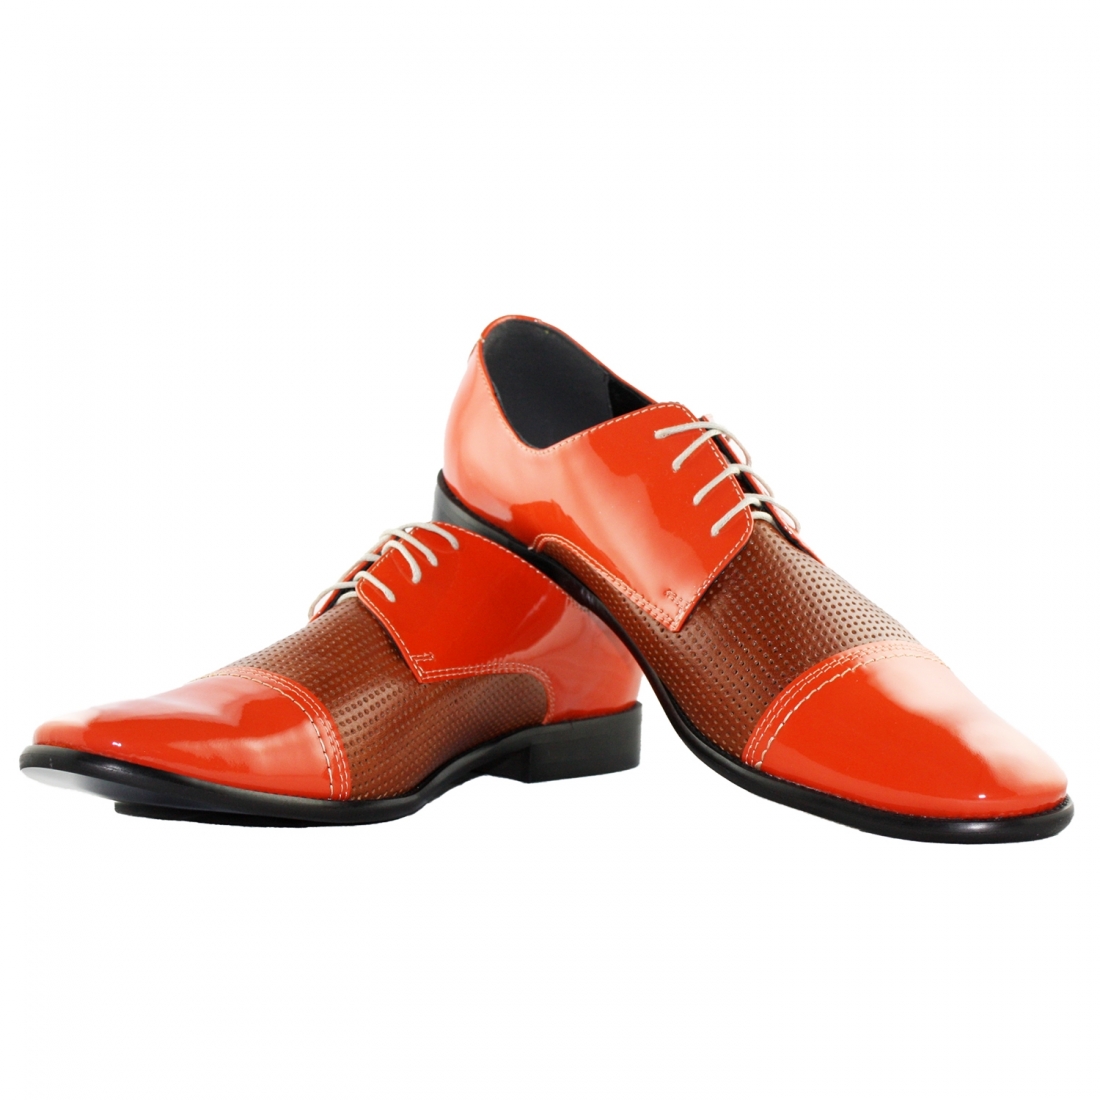 Modello Soterone - Schnürer - Handmade Colorful Italian Leather Shoes